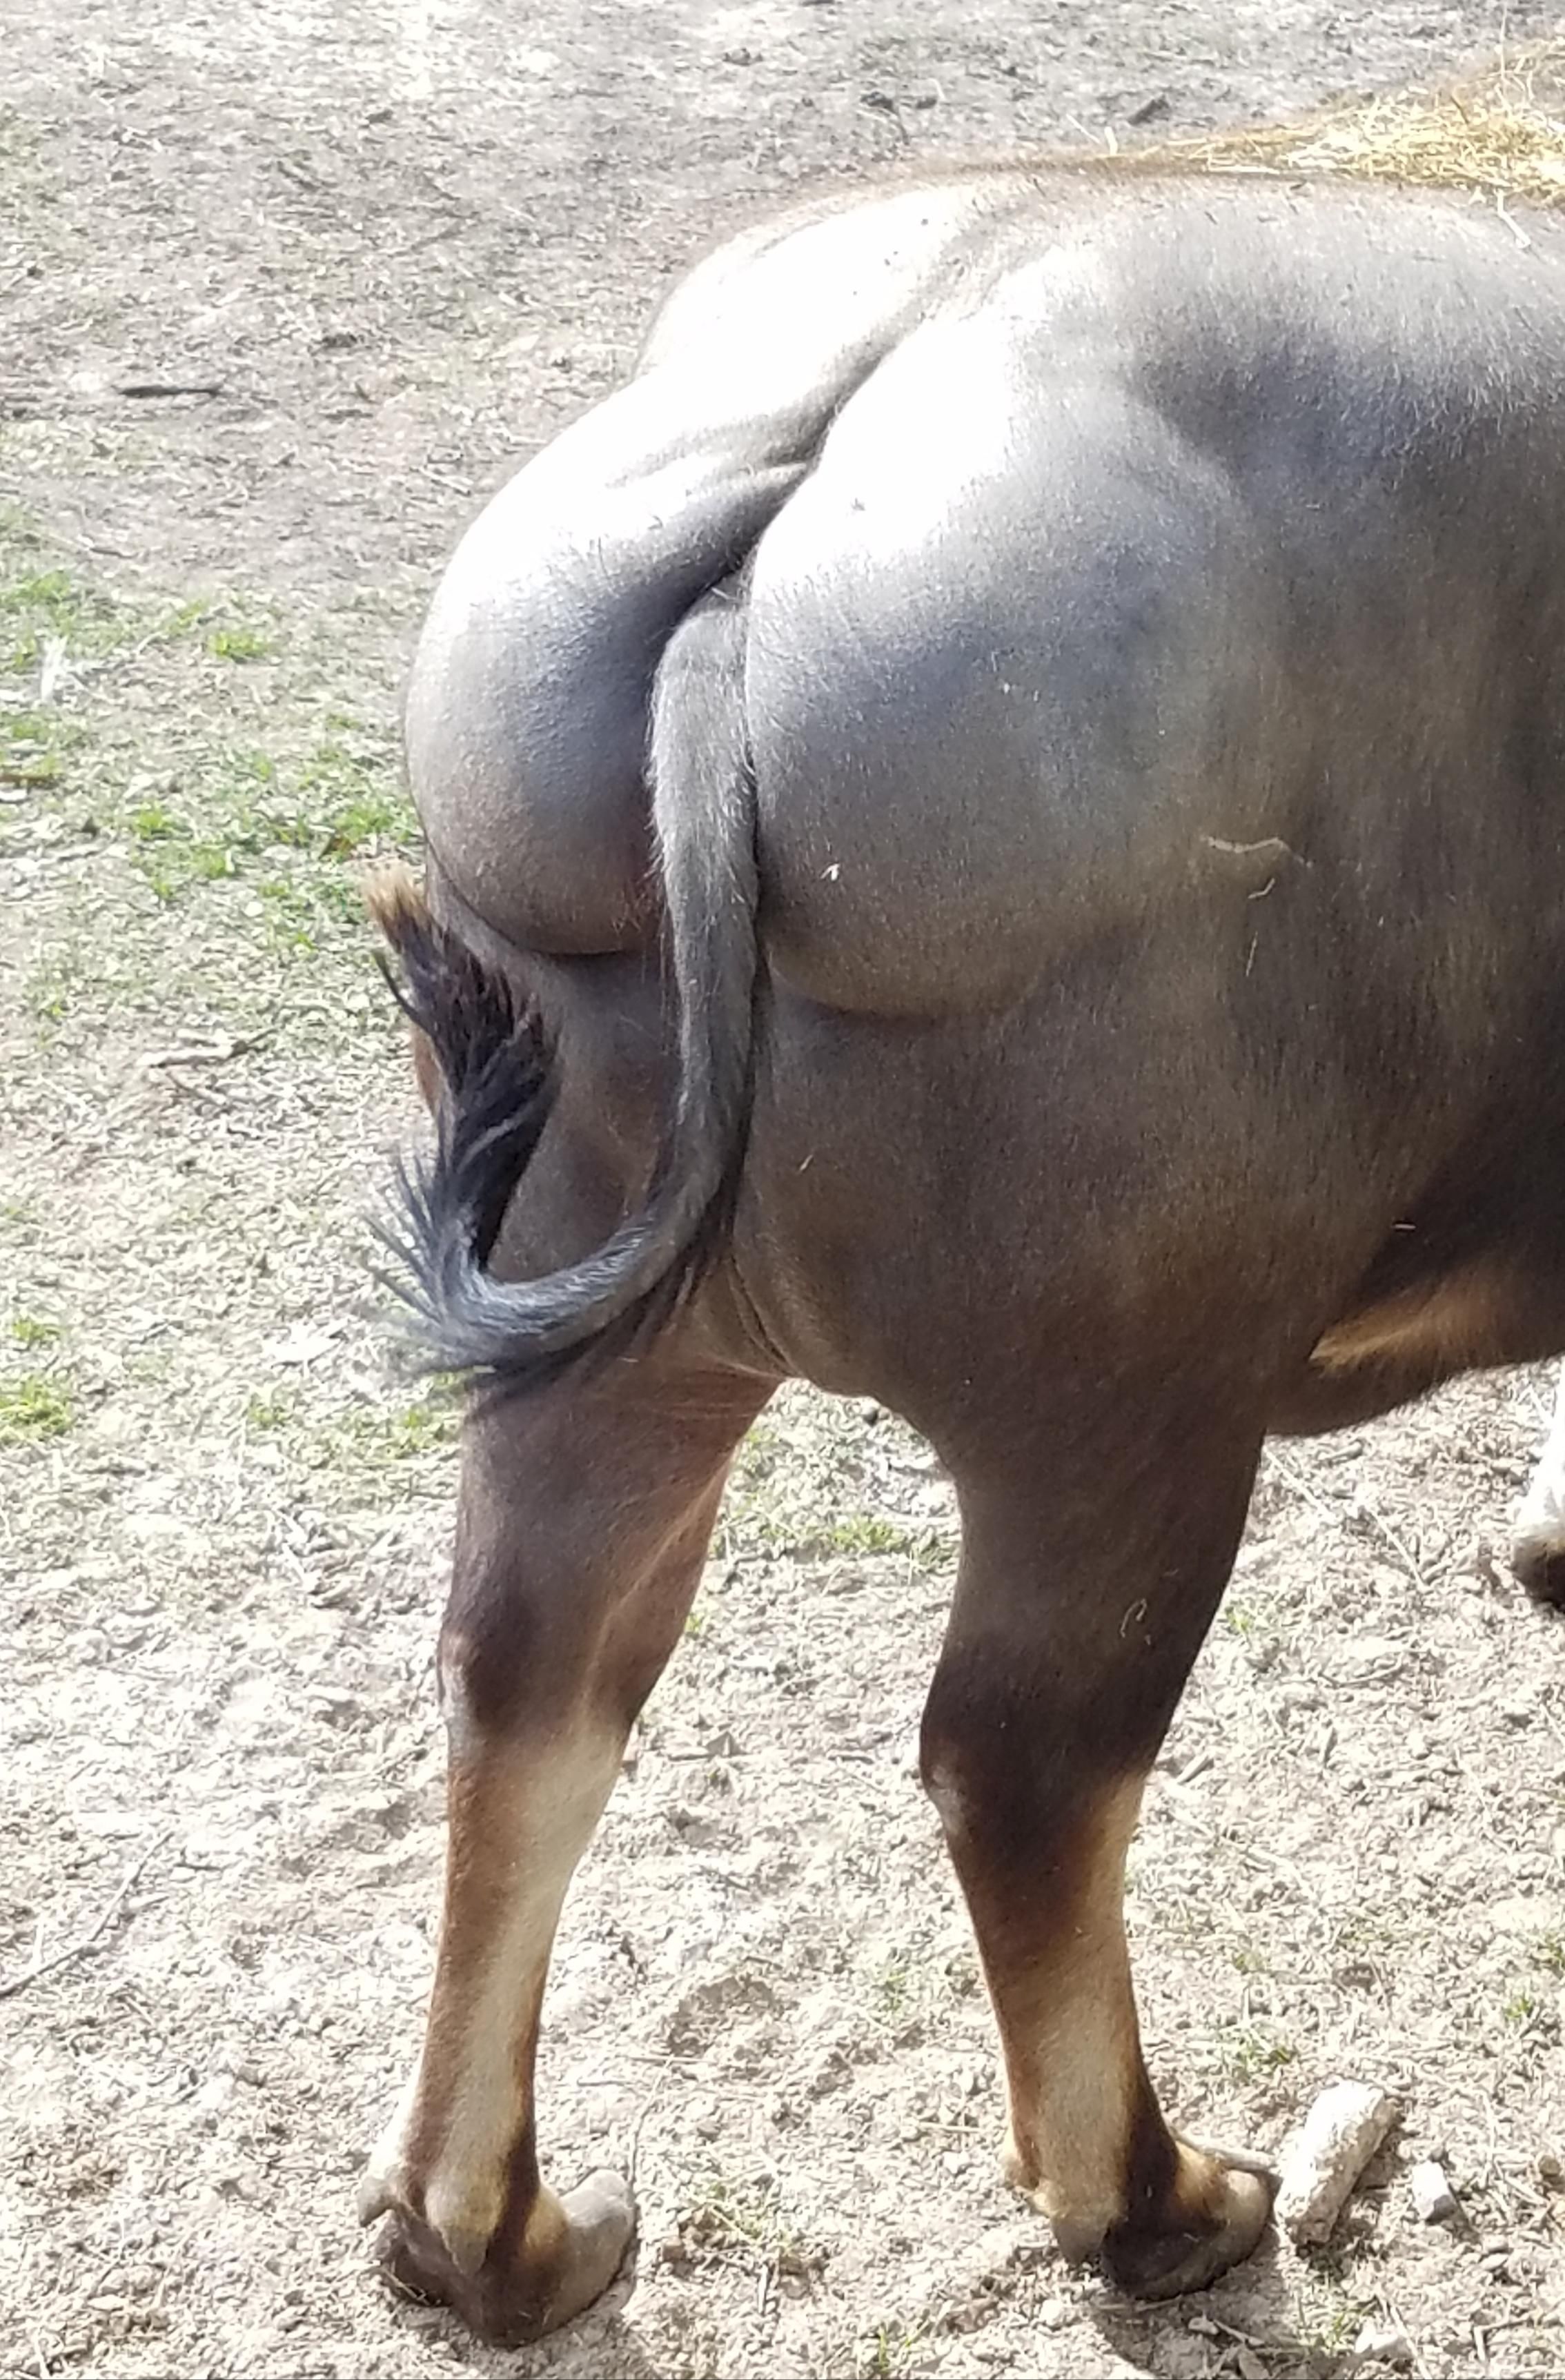 Went to a ride through "safari". I took at least 200 pics. This is the only pic my husband took.